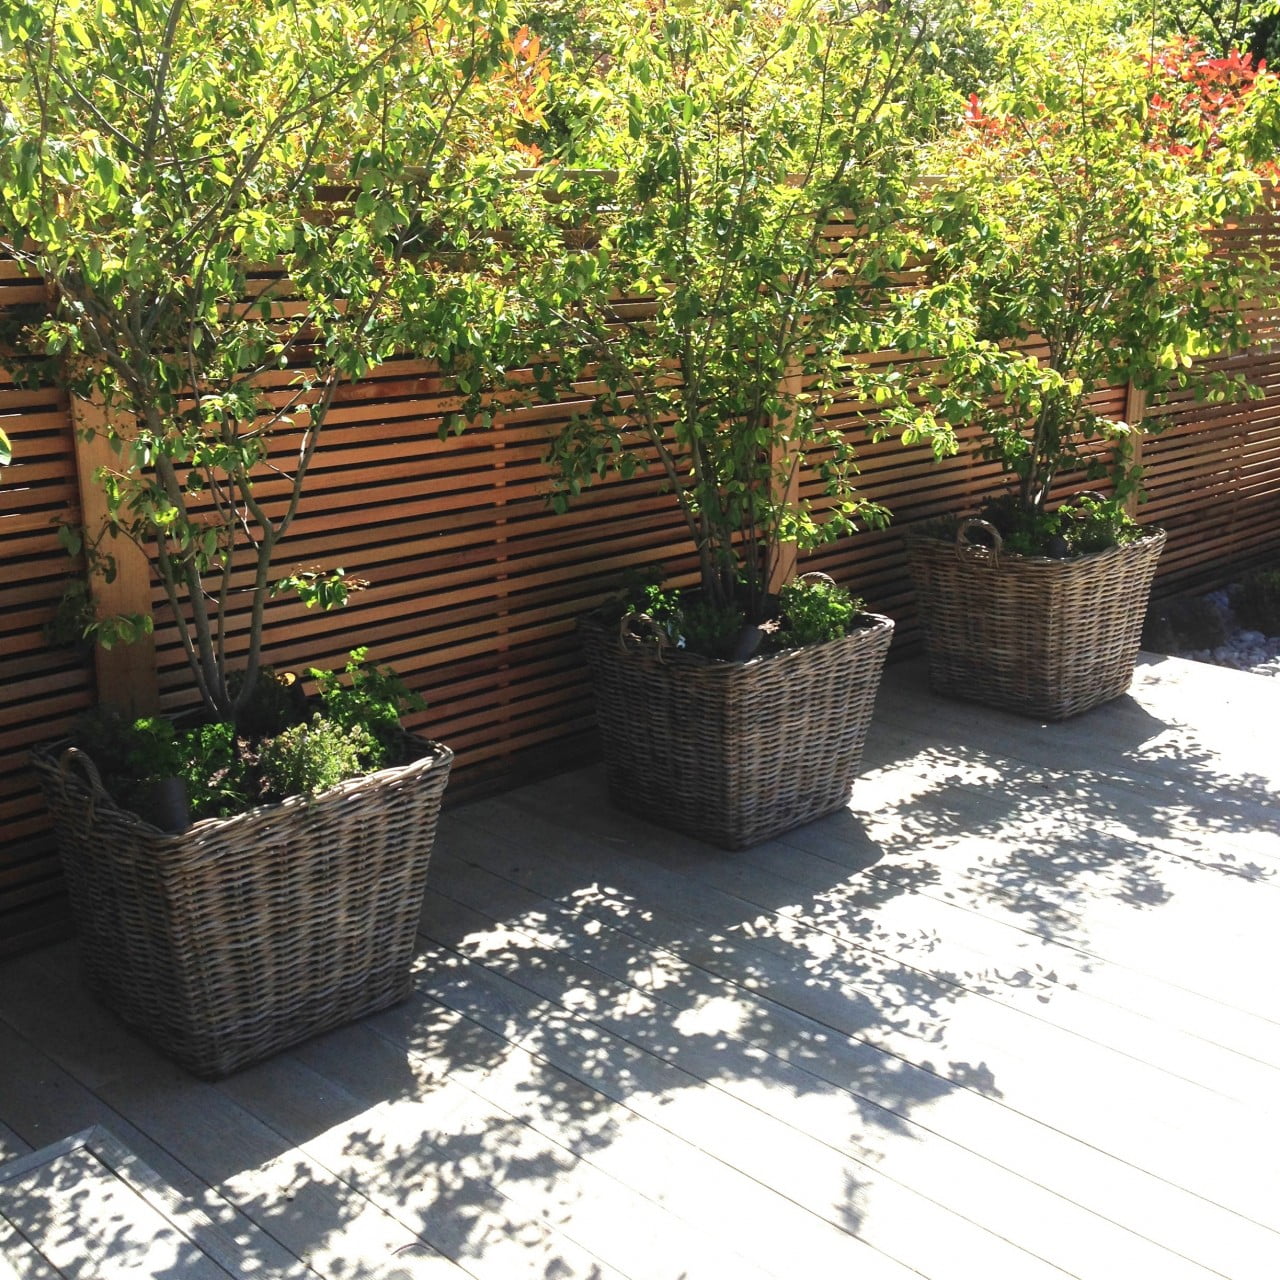 Smart baskets with Amelanchier trees, herbs & lovely cedar strip fencing